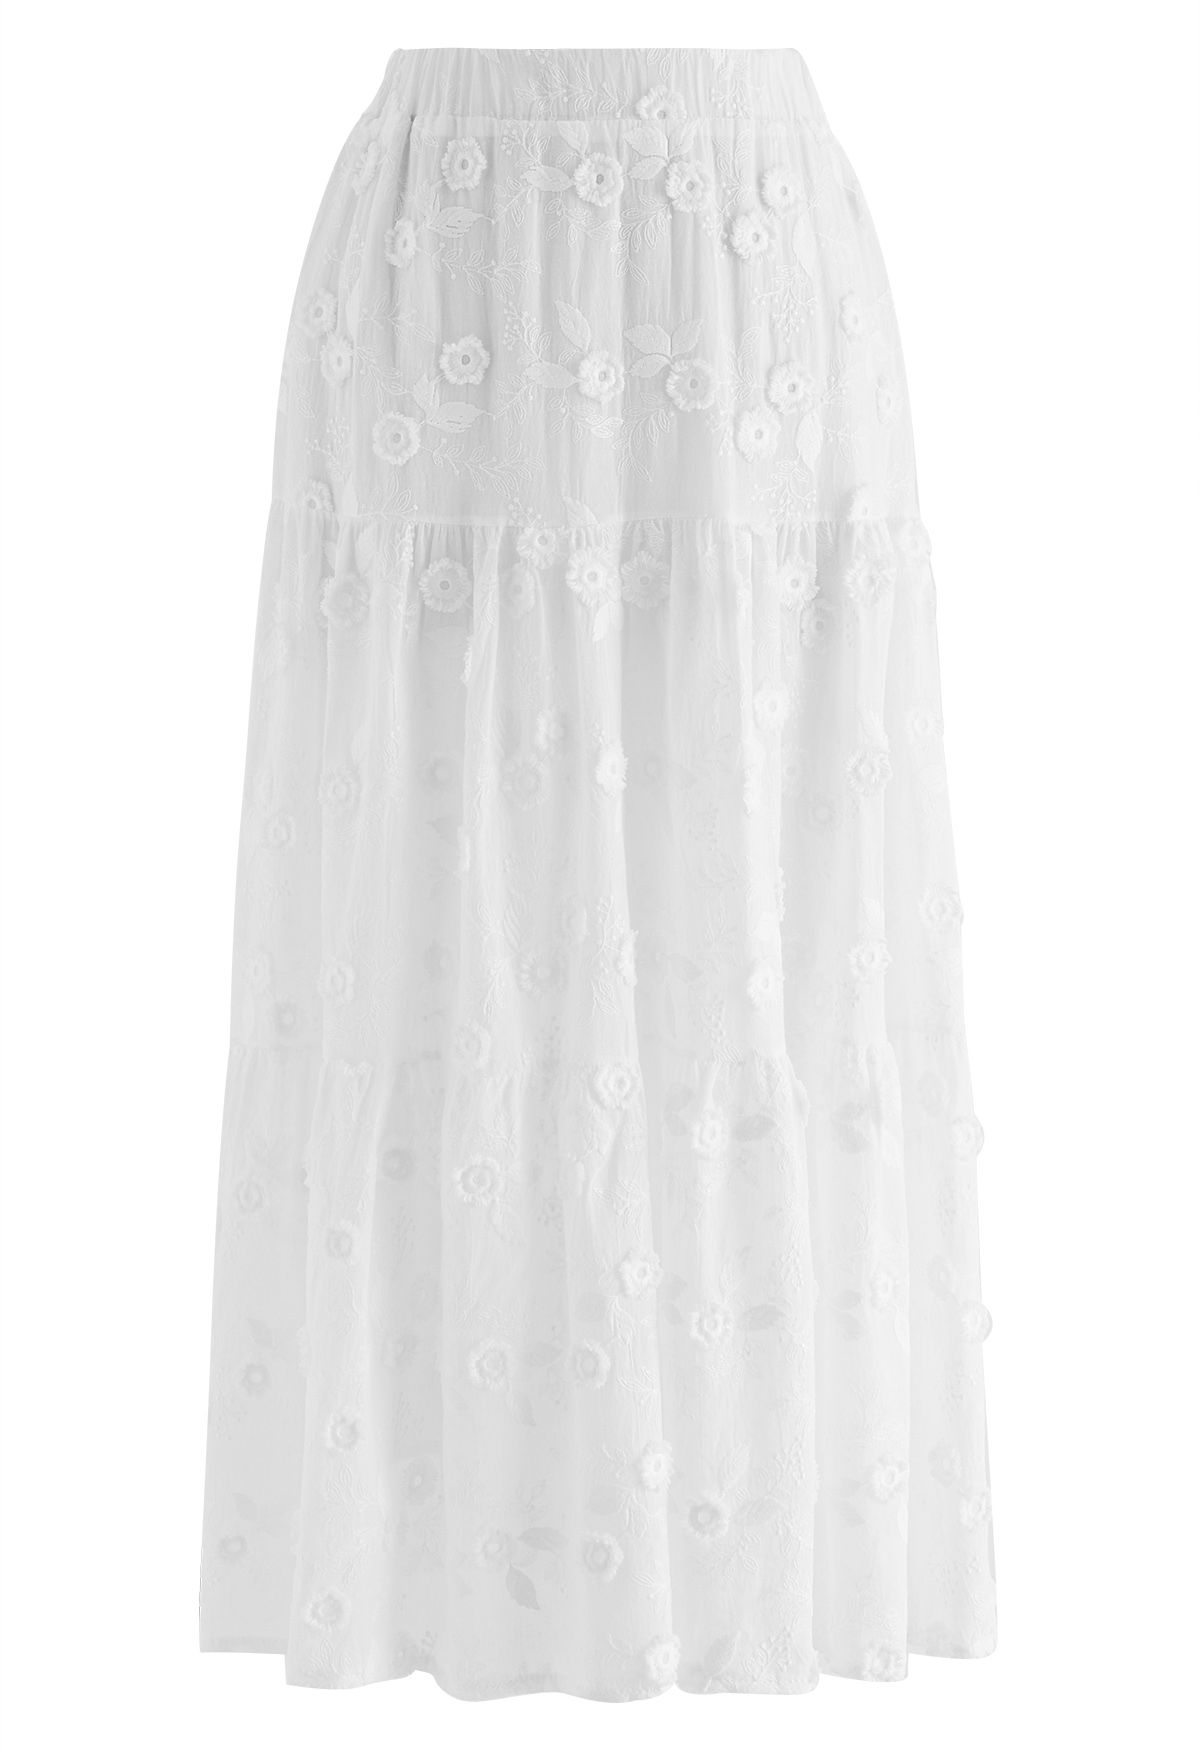 Tasseled Florets Embroidered Midi Skirt in White - Retro, Indie and ...